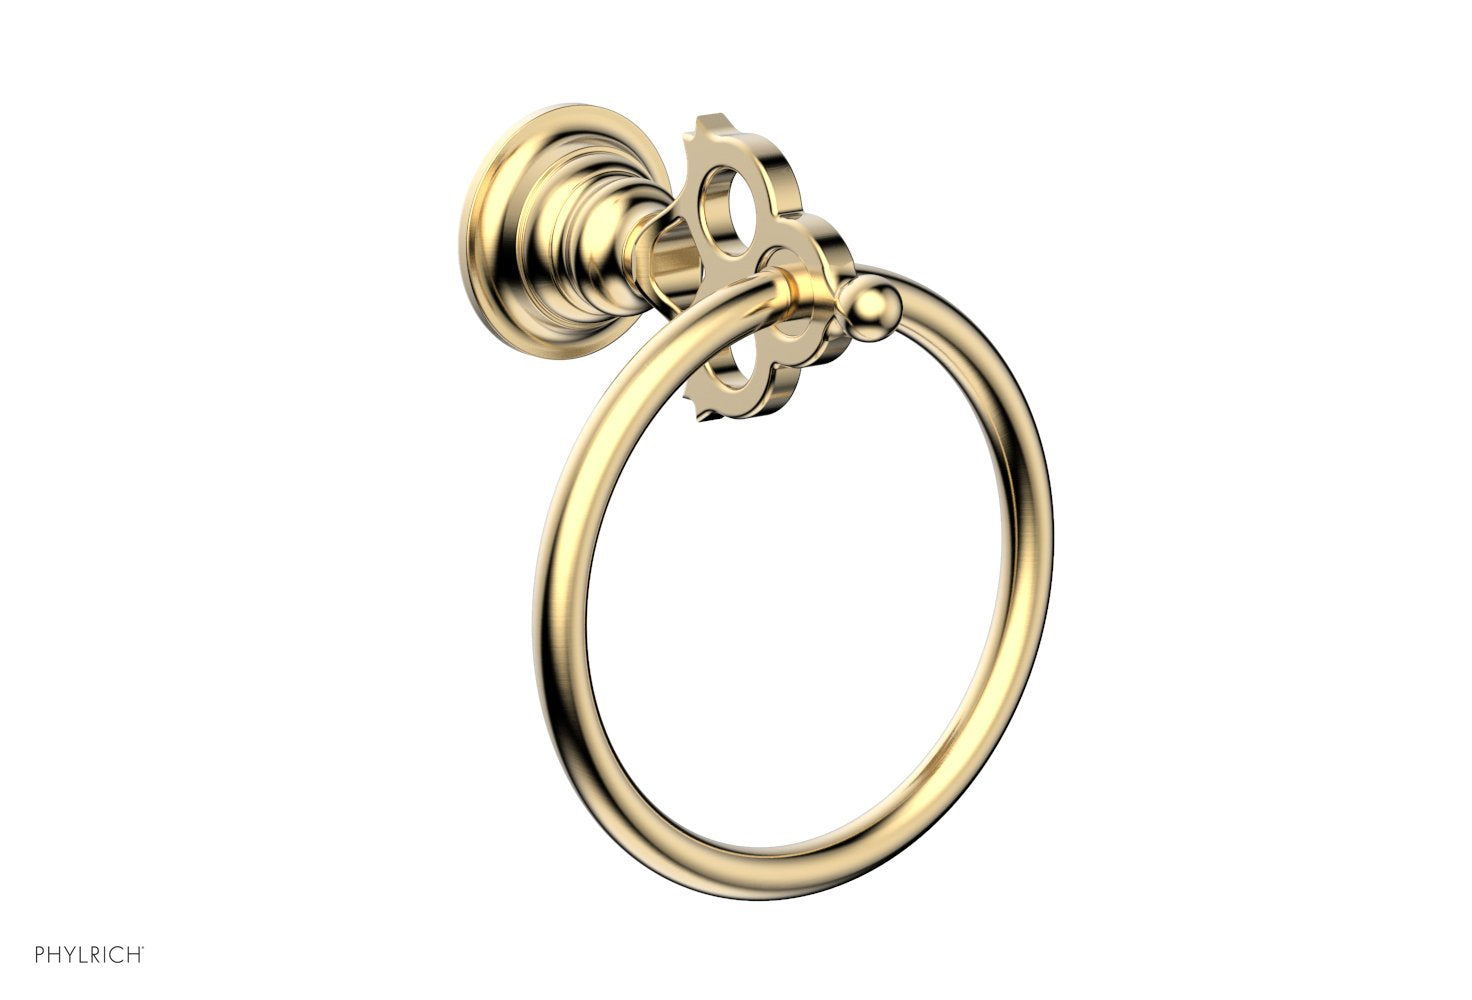 Phylrich, Towel Ring, Maison, 164-75